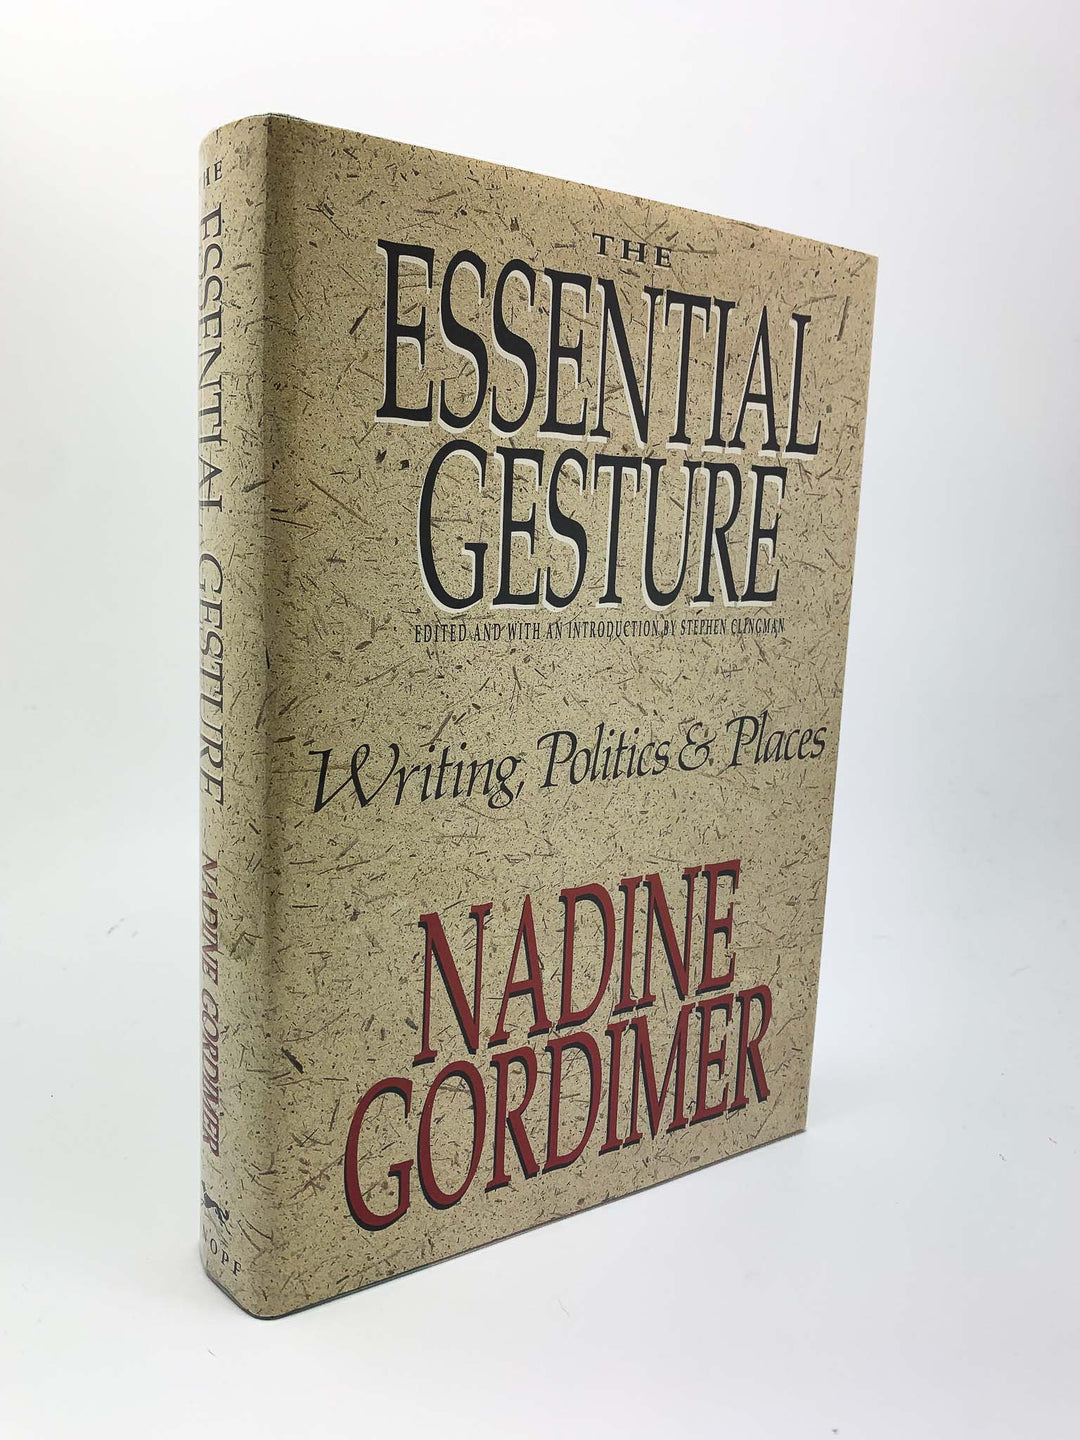 Gordimer, Nadine - The Essential Gesture - SIGNED | front cover